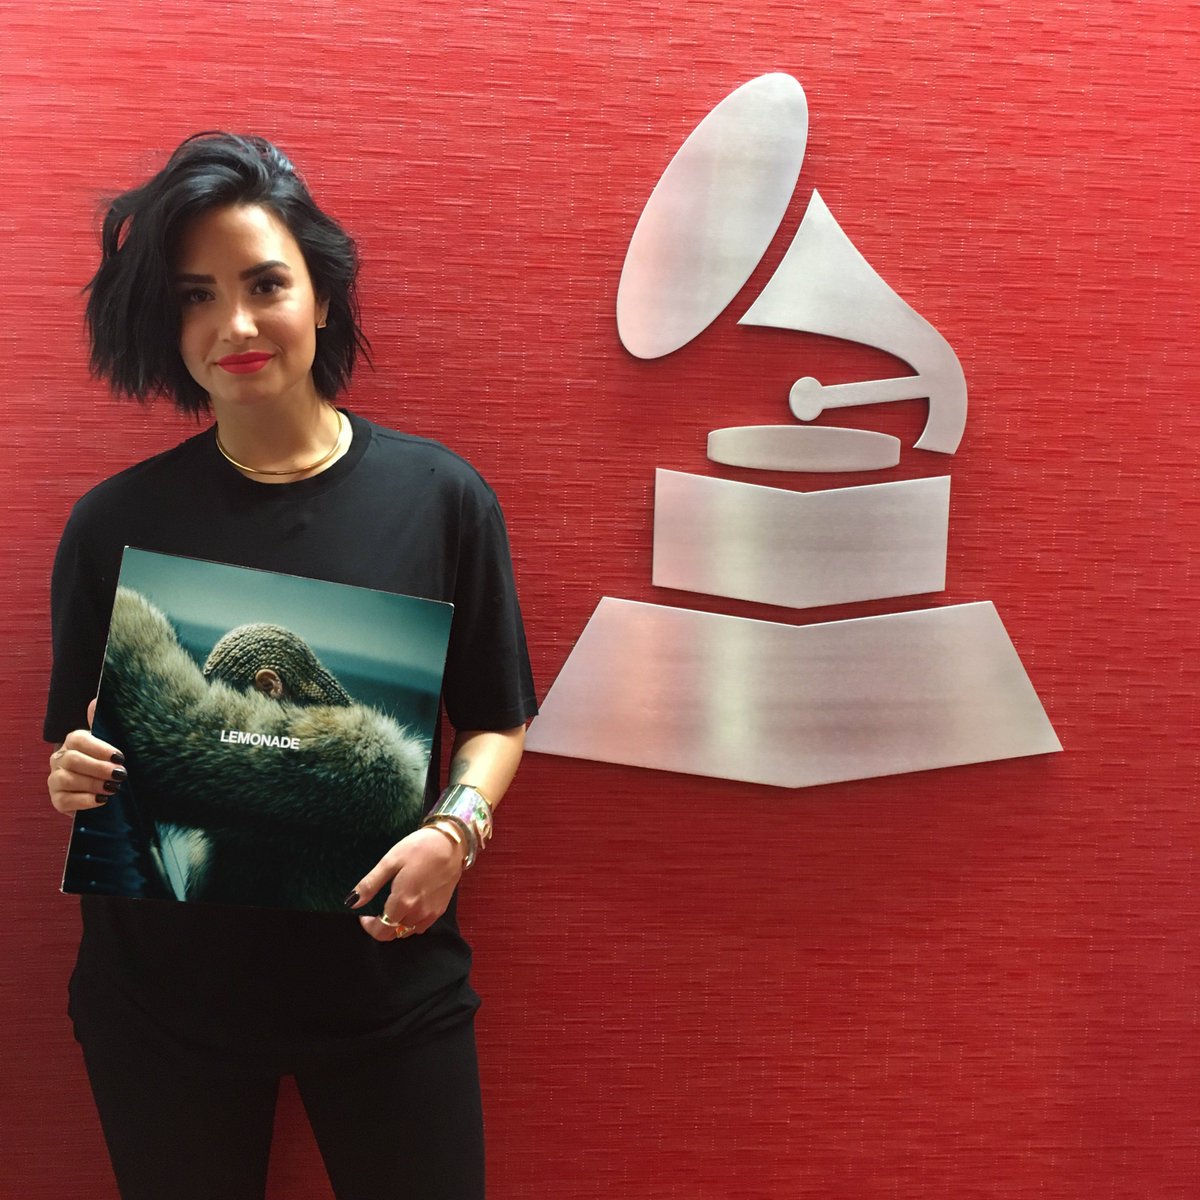 Take the #MusiCaresChallenge! Post a pic, tag friends & donate to support @MusiCares: https://t.co/oCXYhBynZL https://t.co/UZ7lk1LzTq